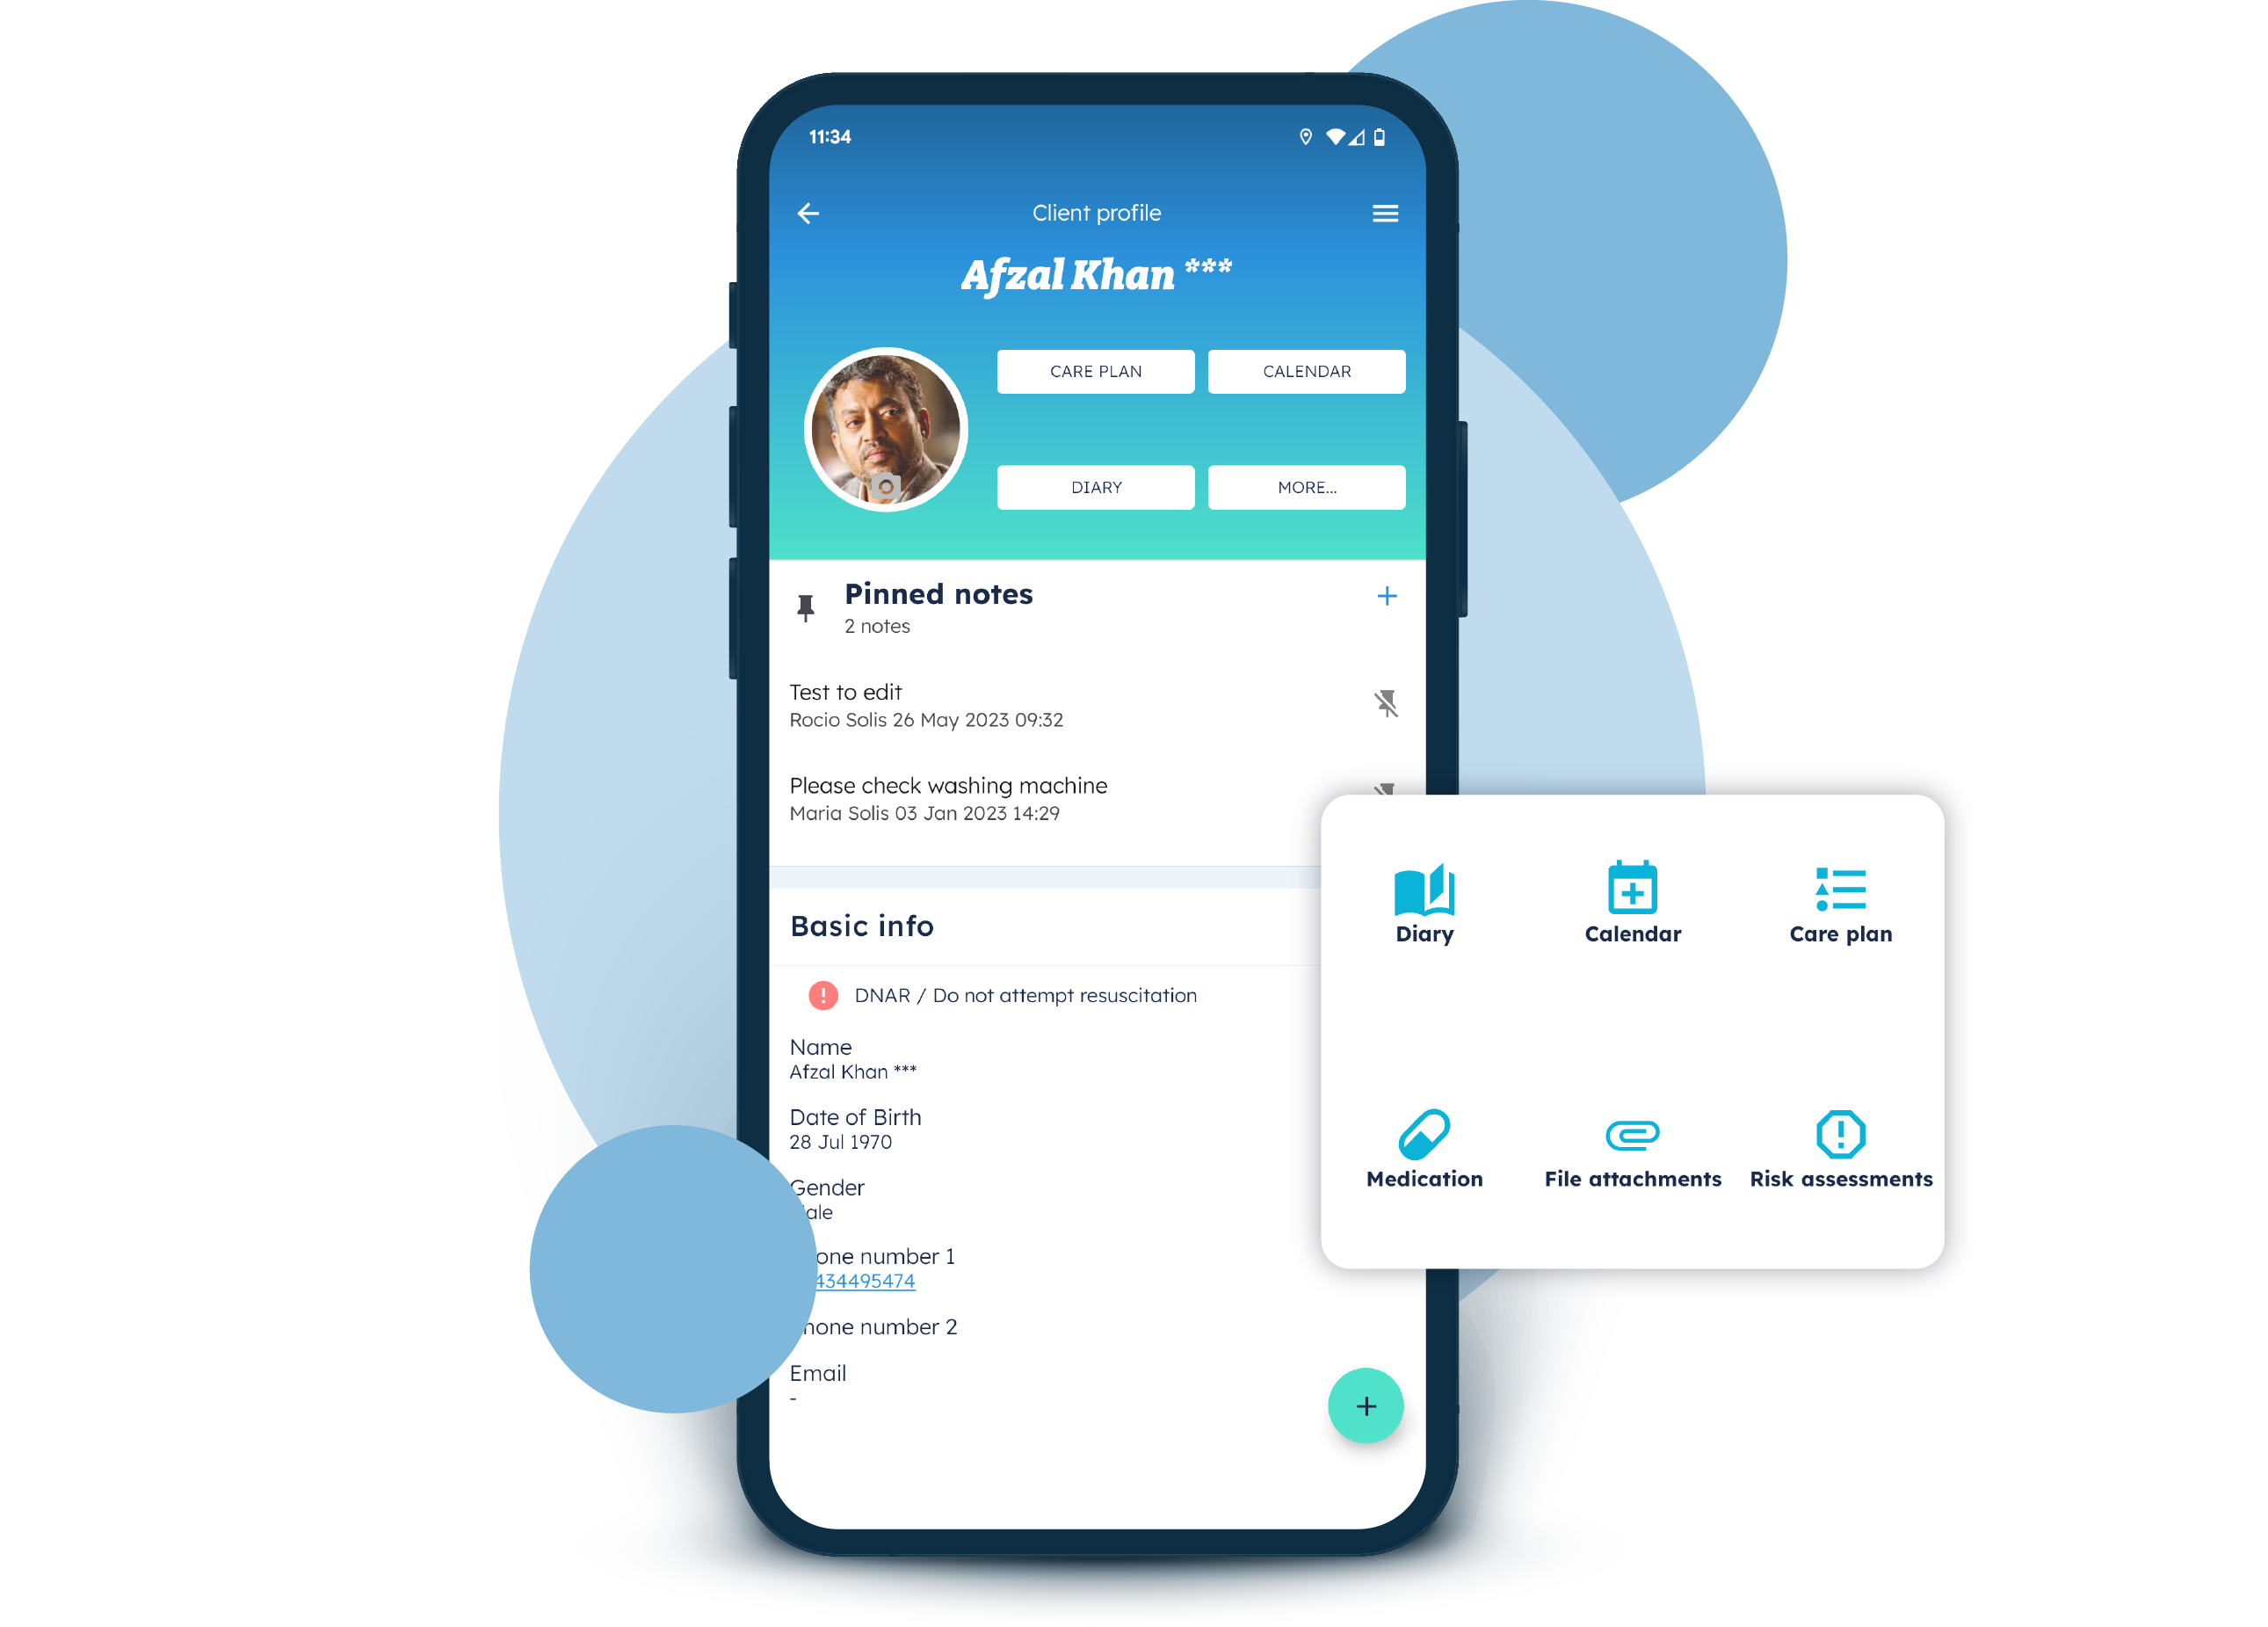 Client overview in the Nursebuddy mobile app